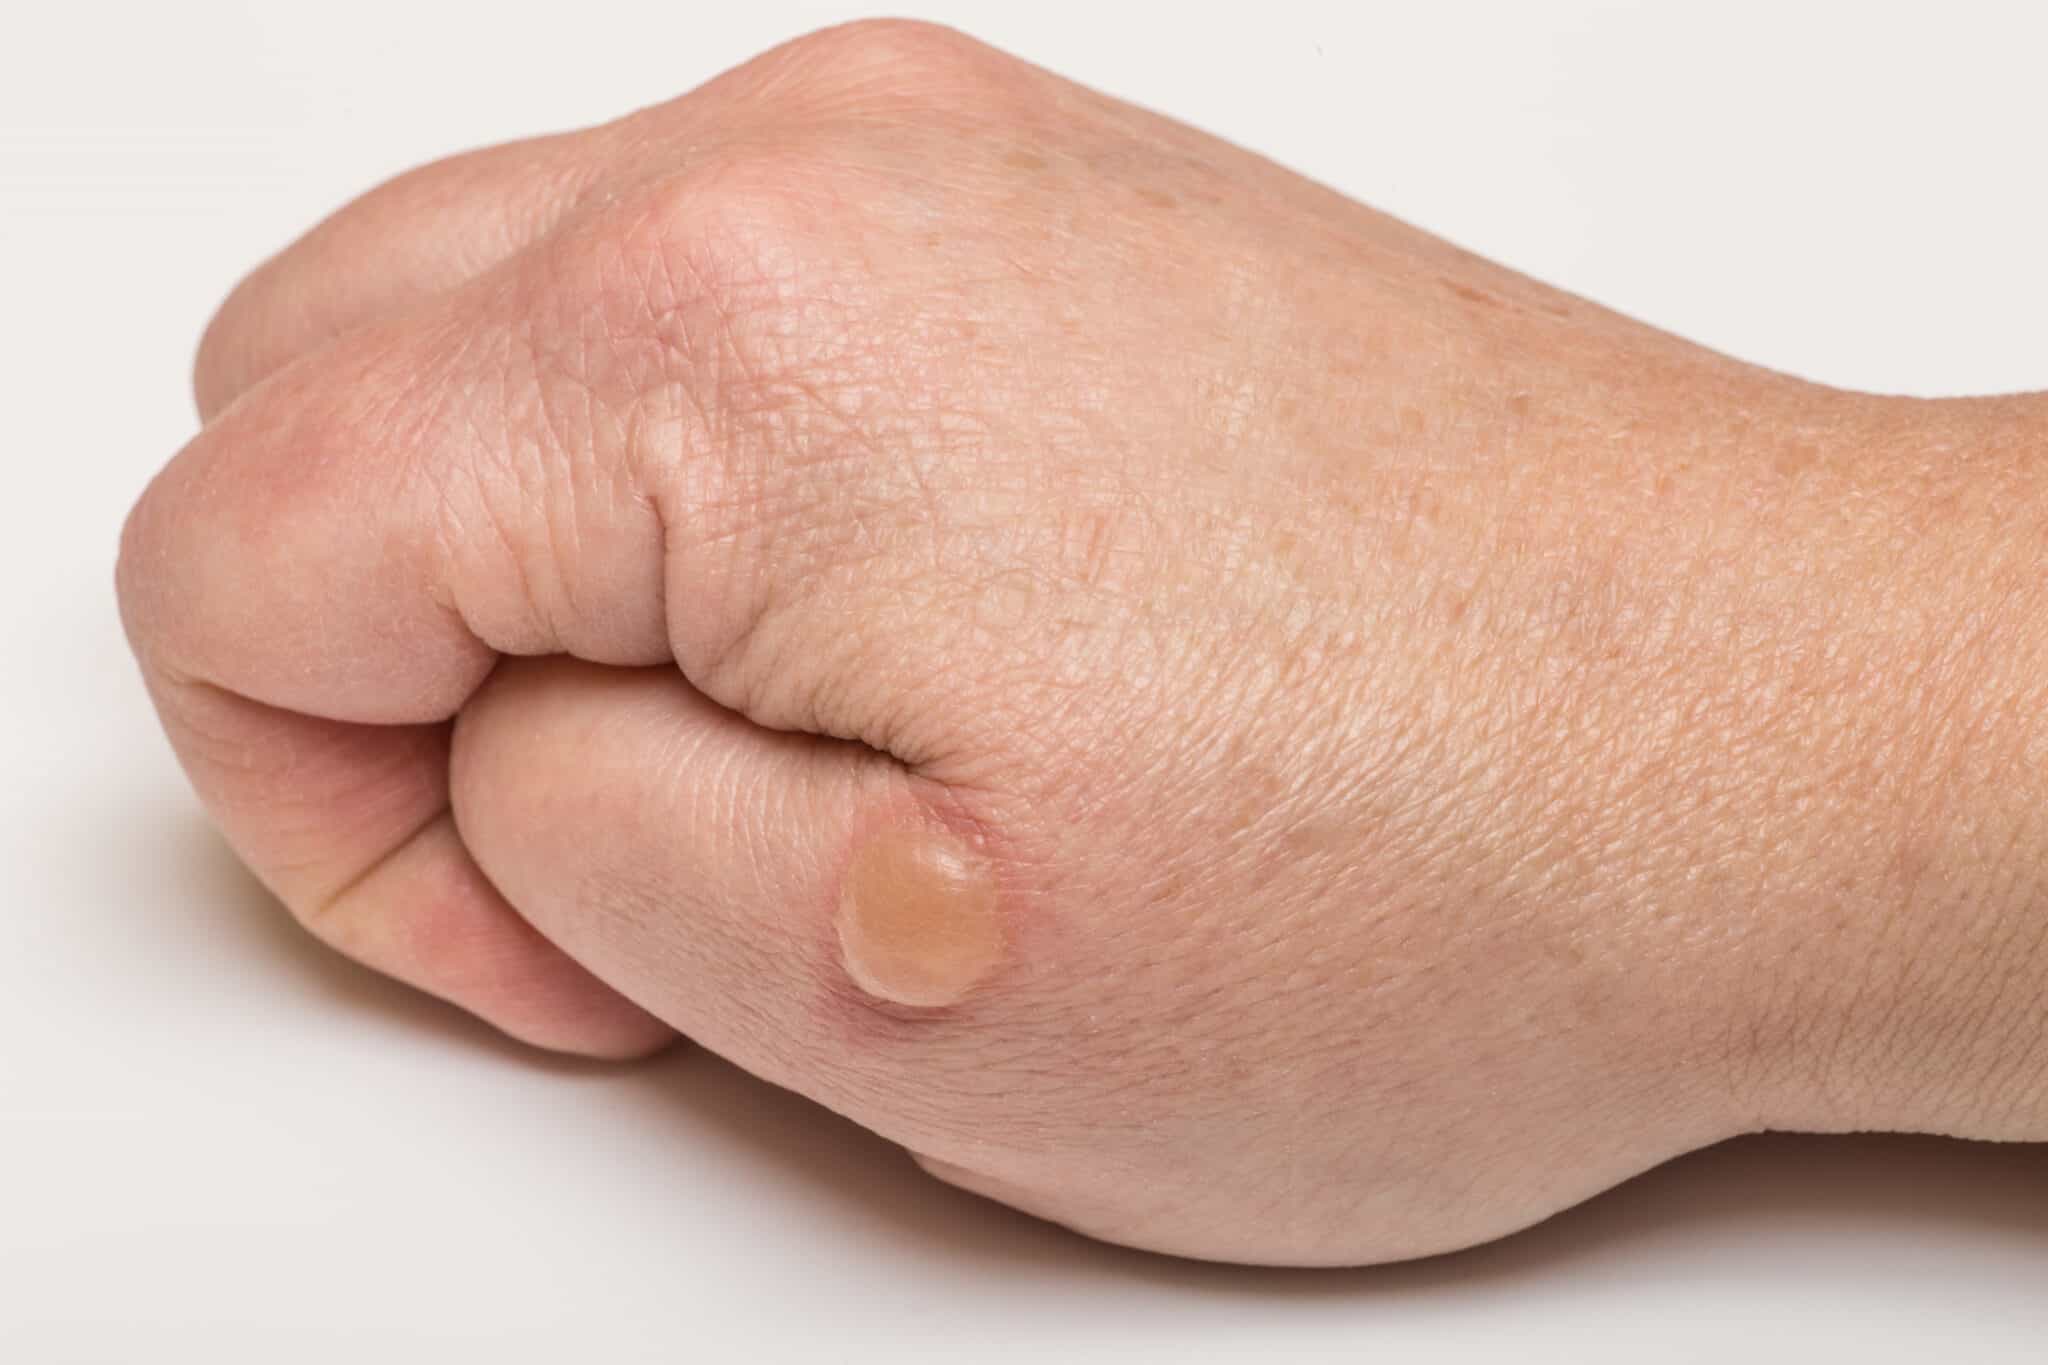 essential oils for blisters